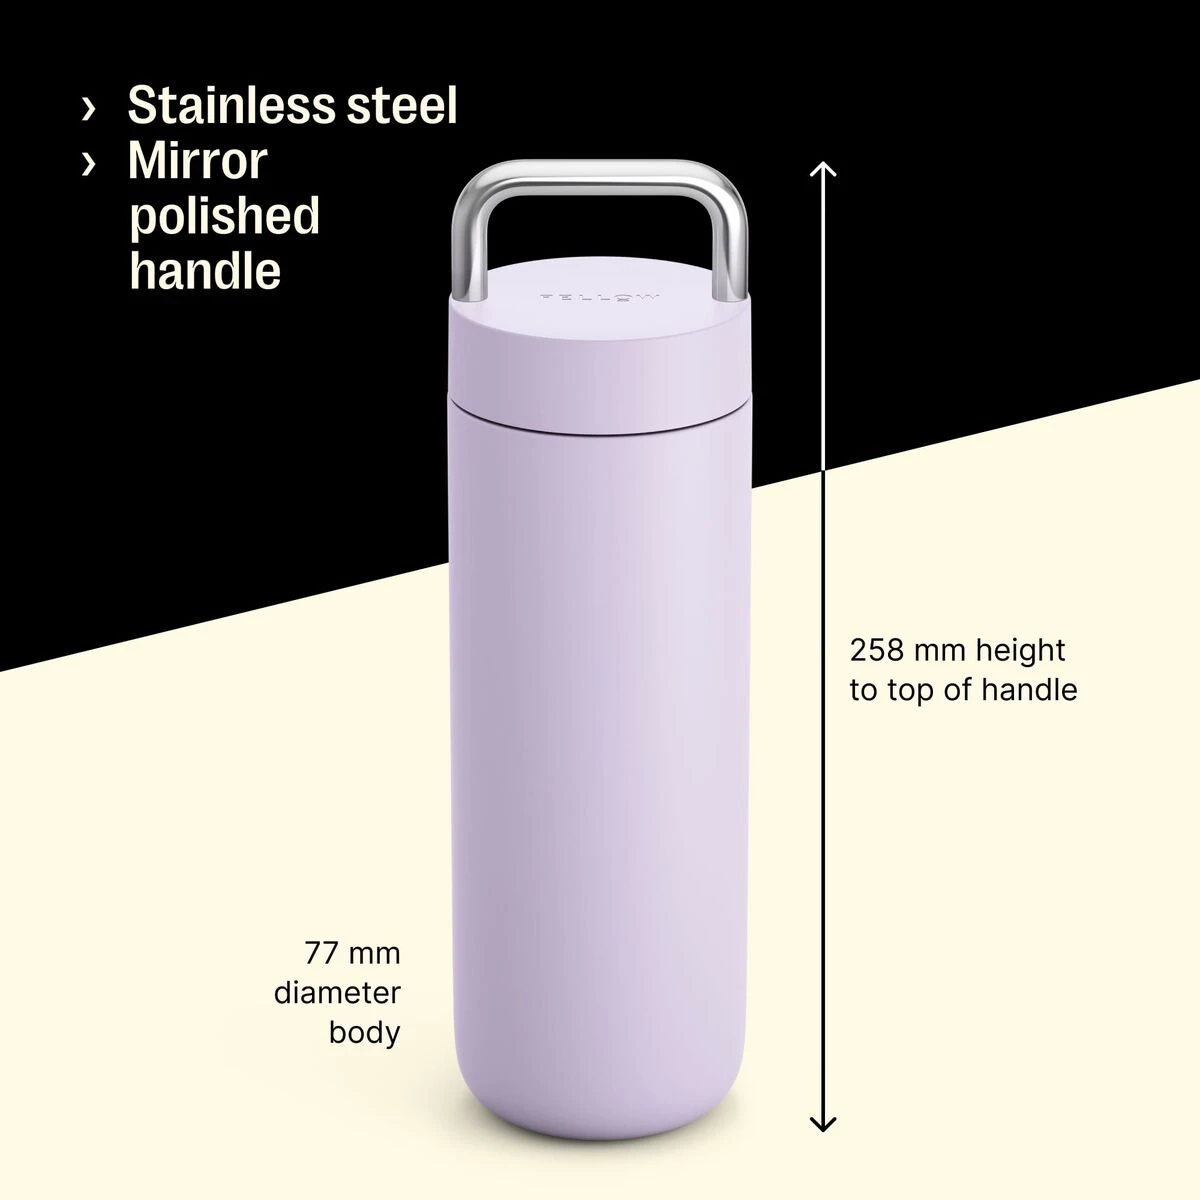 Stainless bottle, polished handle, 258 mm tall, 77 mm diameter